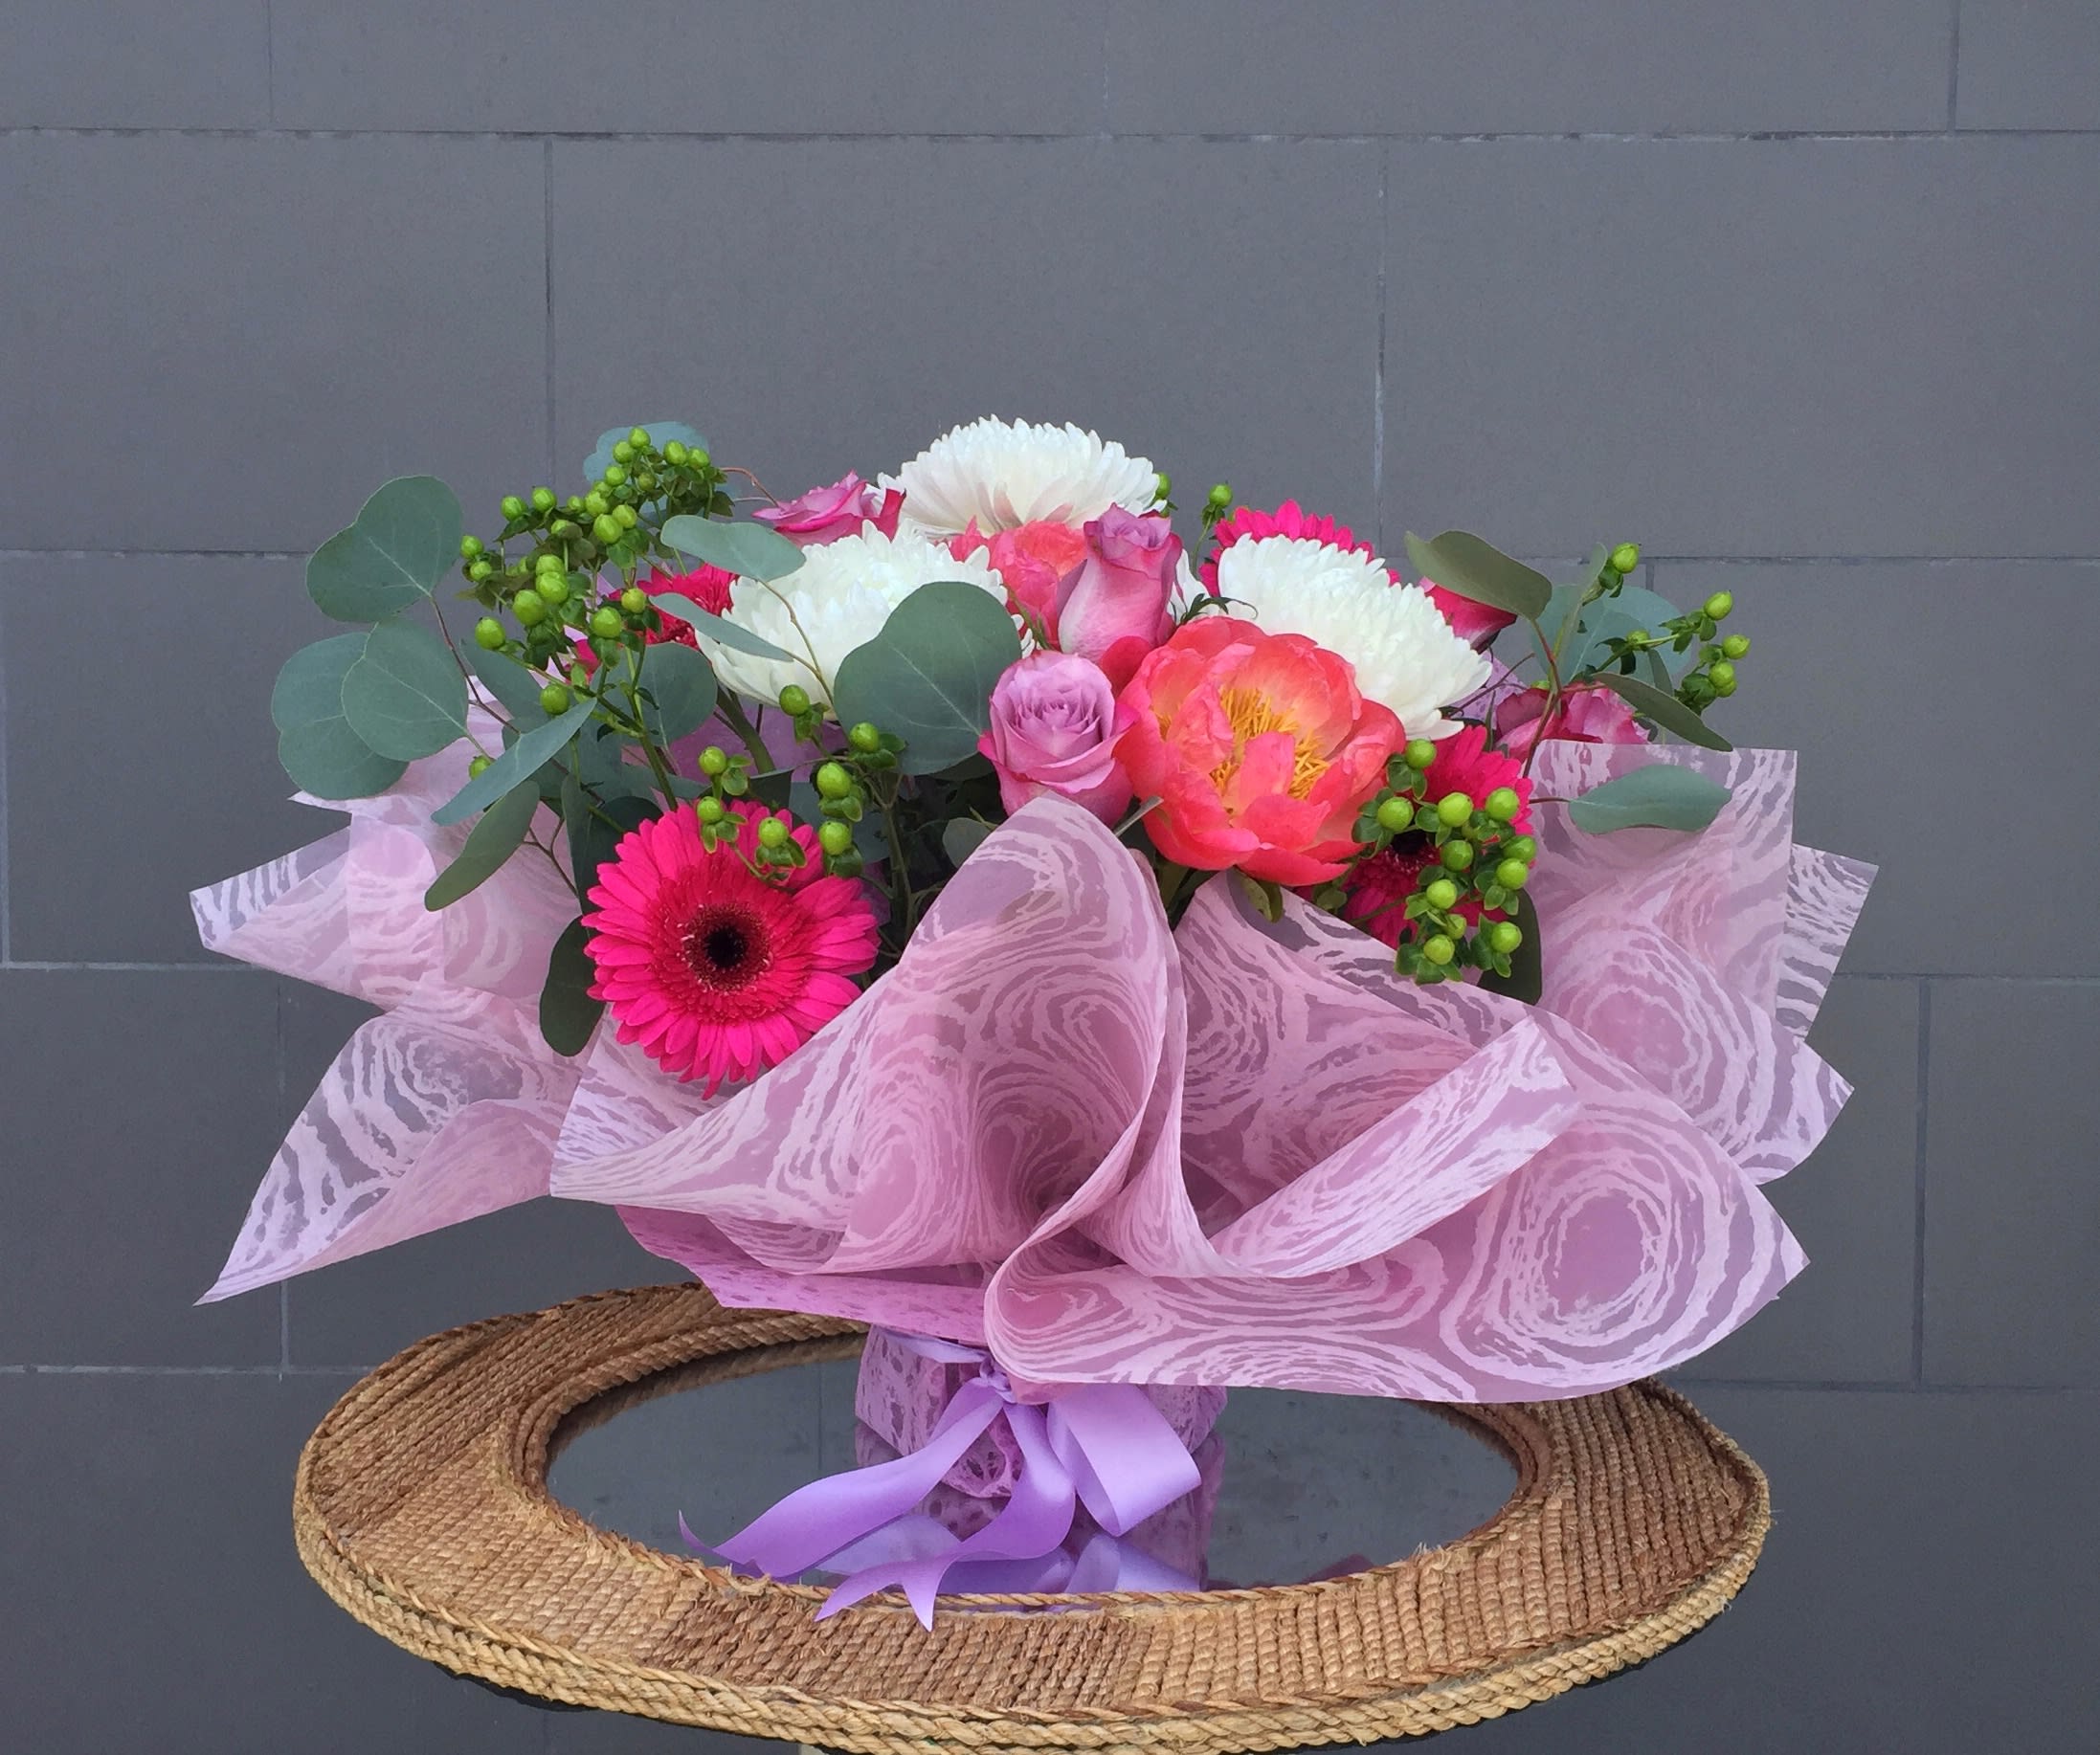 Lovely Wrapped Bouquet - Lovely bouquet including rose, gerbera... and accents is good for all occasions.